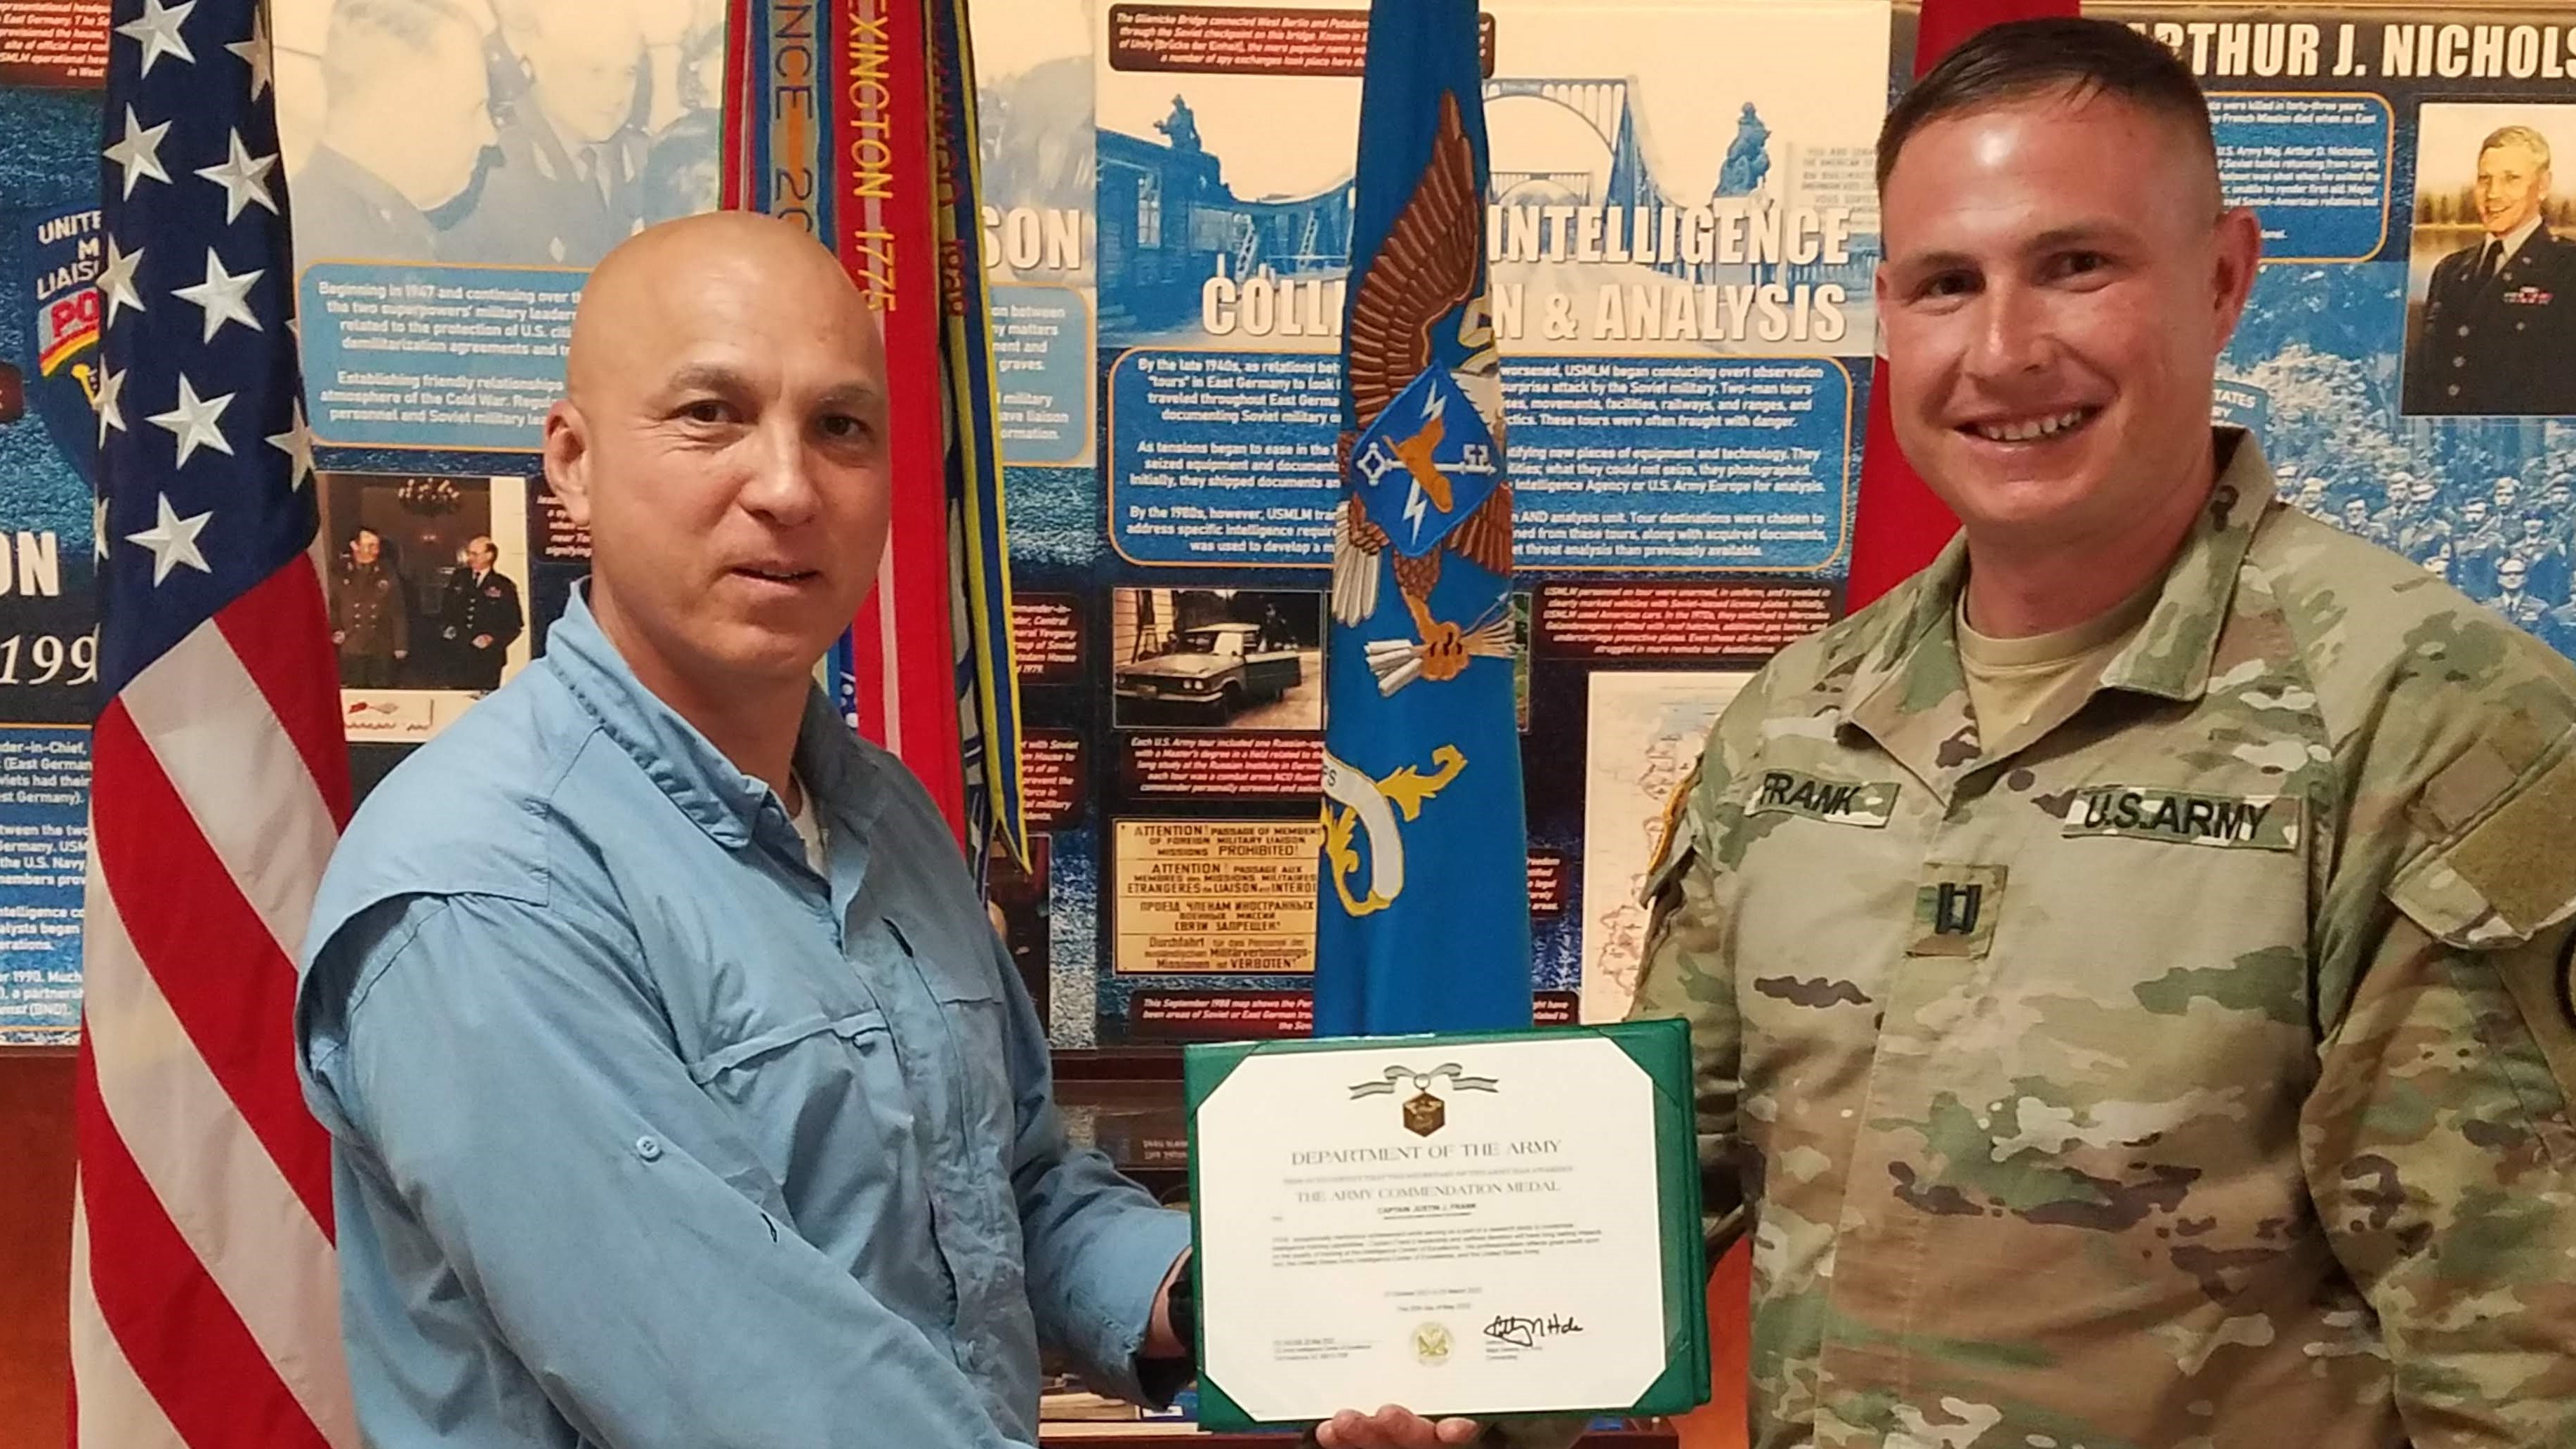 CPT Justin Frank receives an Army Commendation Medal from Mr. Pete Don, SES, USAICoE, Fort Huachuca for his thesis using VR to train intel analysts.